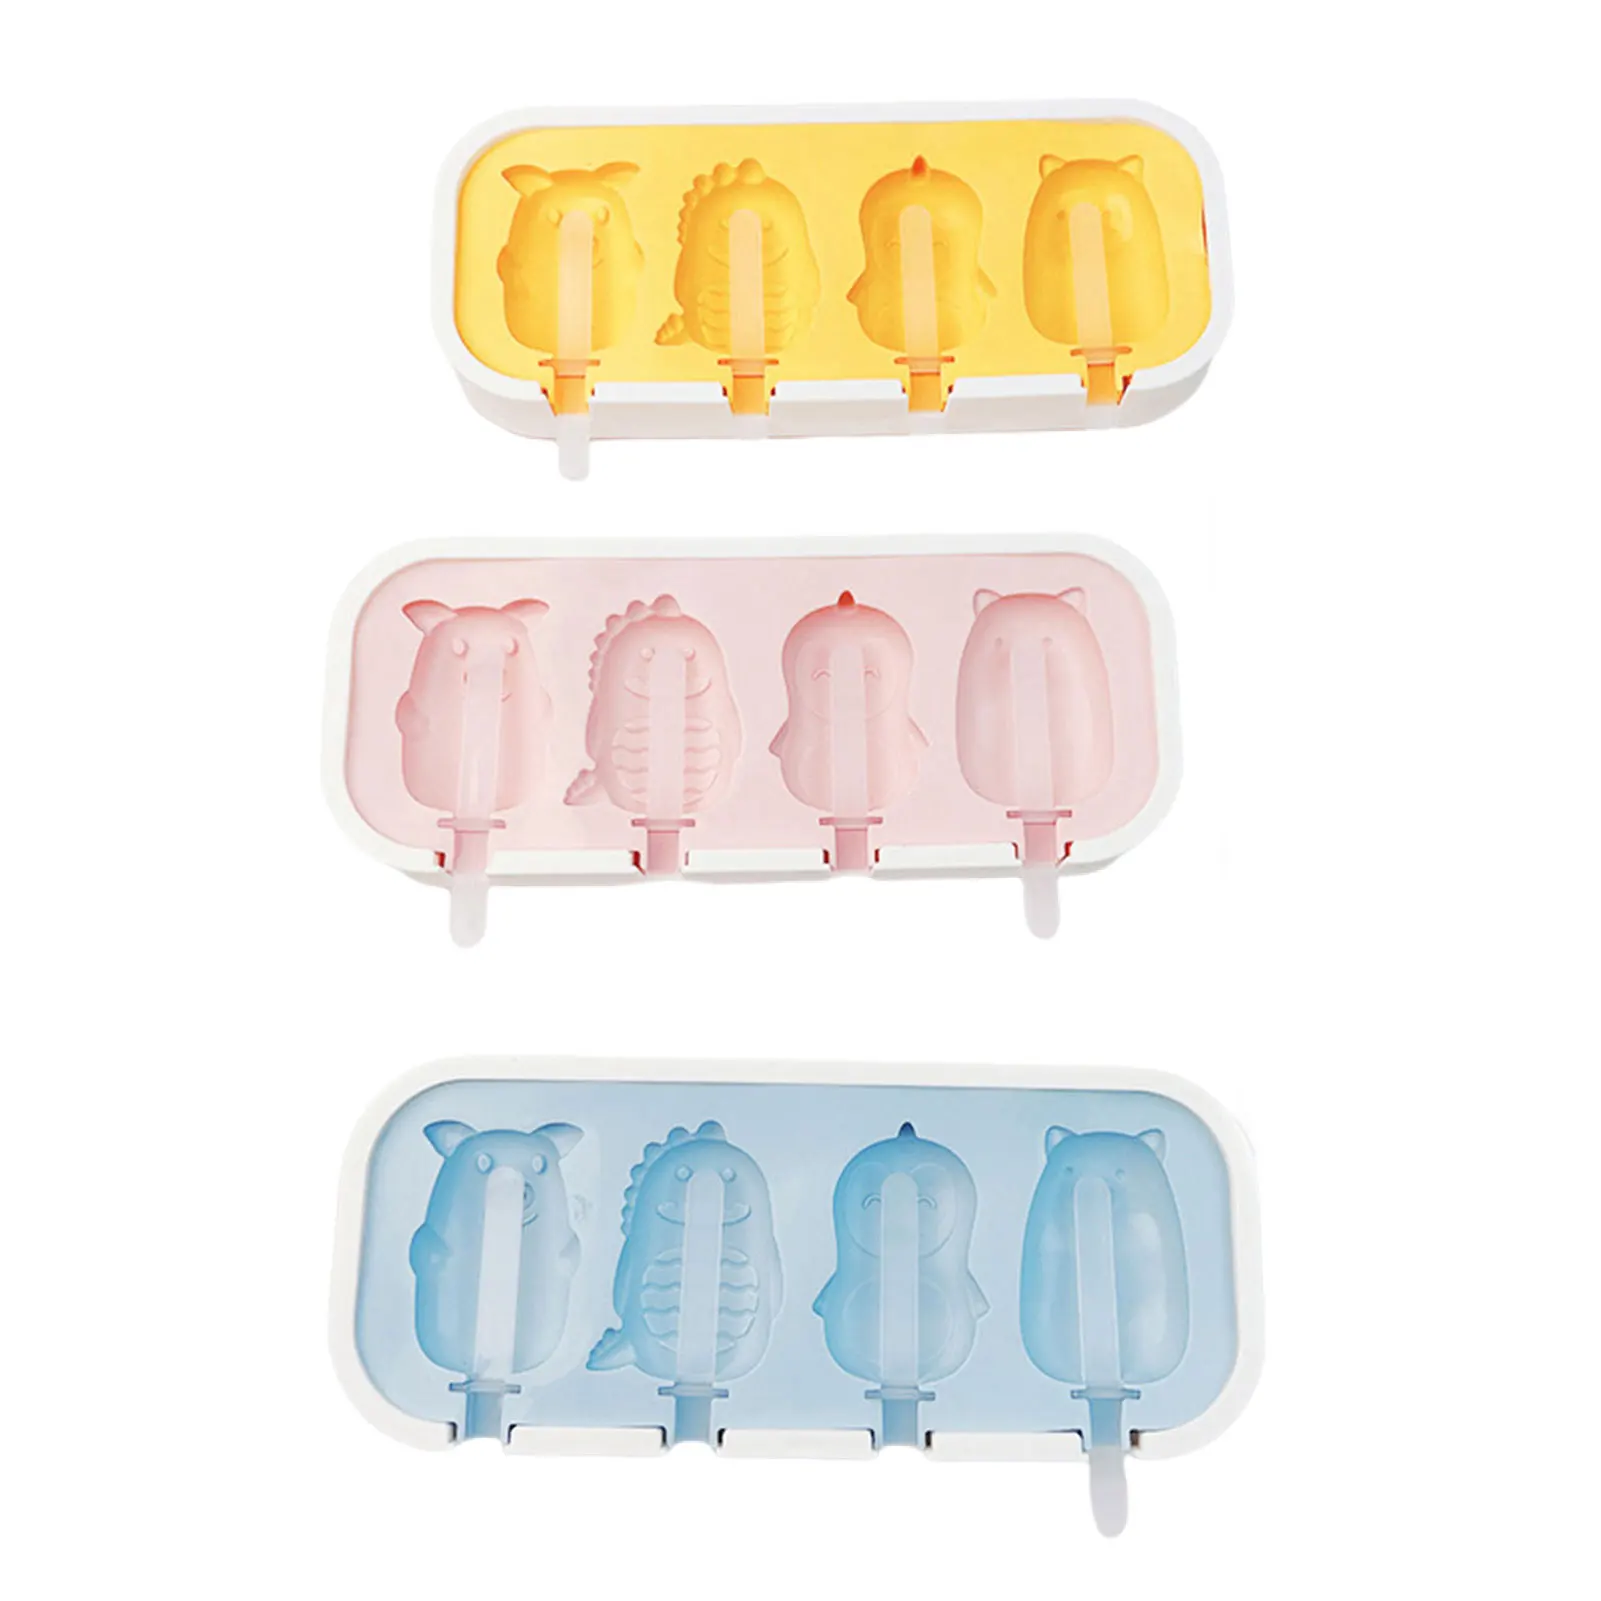 

Silicone Ice Molds With Lids Homemade Ice Lolly Moulds Frozen Ice Sicle Maker DIY Ice Molds With Fruit And Animale Shape For